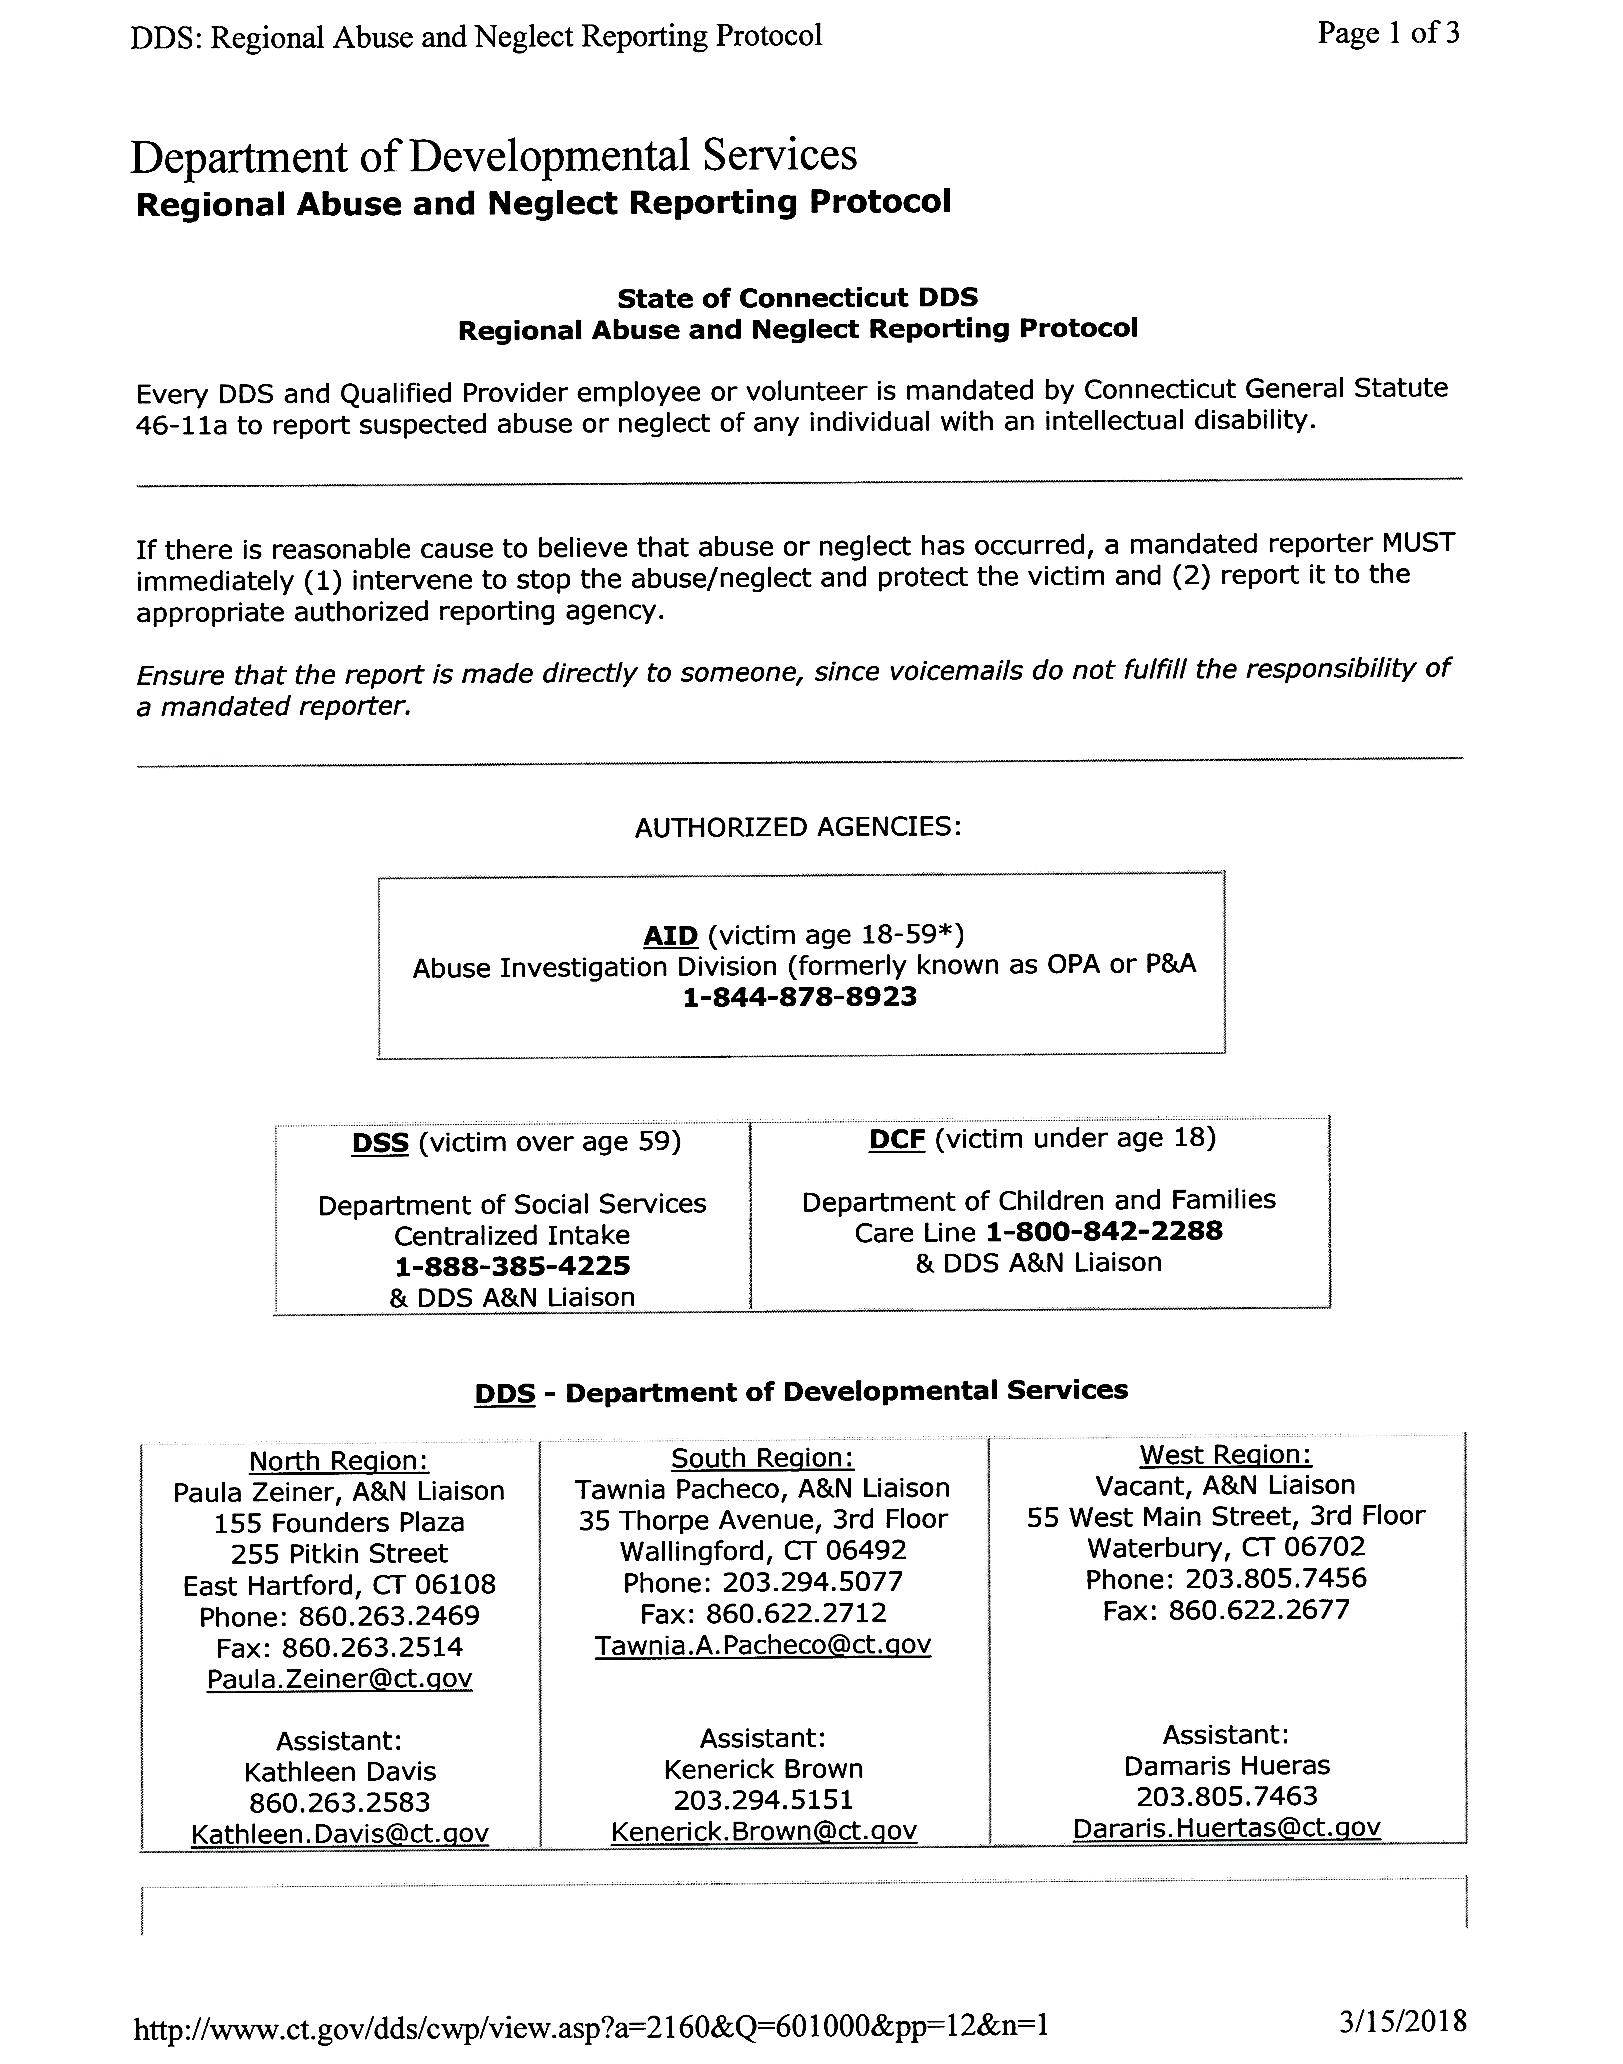 Department of Developmental Services Regional Abuse and Neglect Reporting Protocol - Page 1